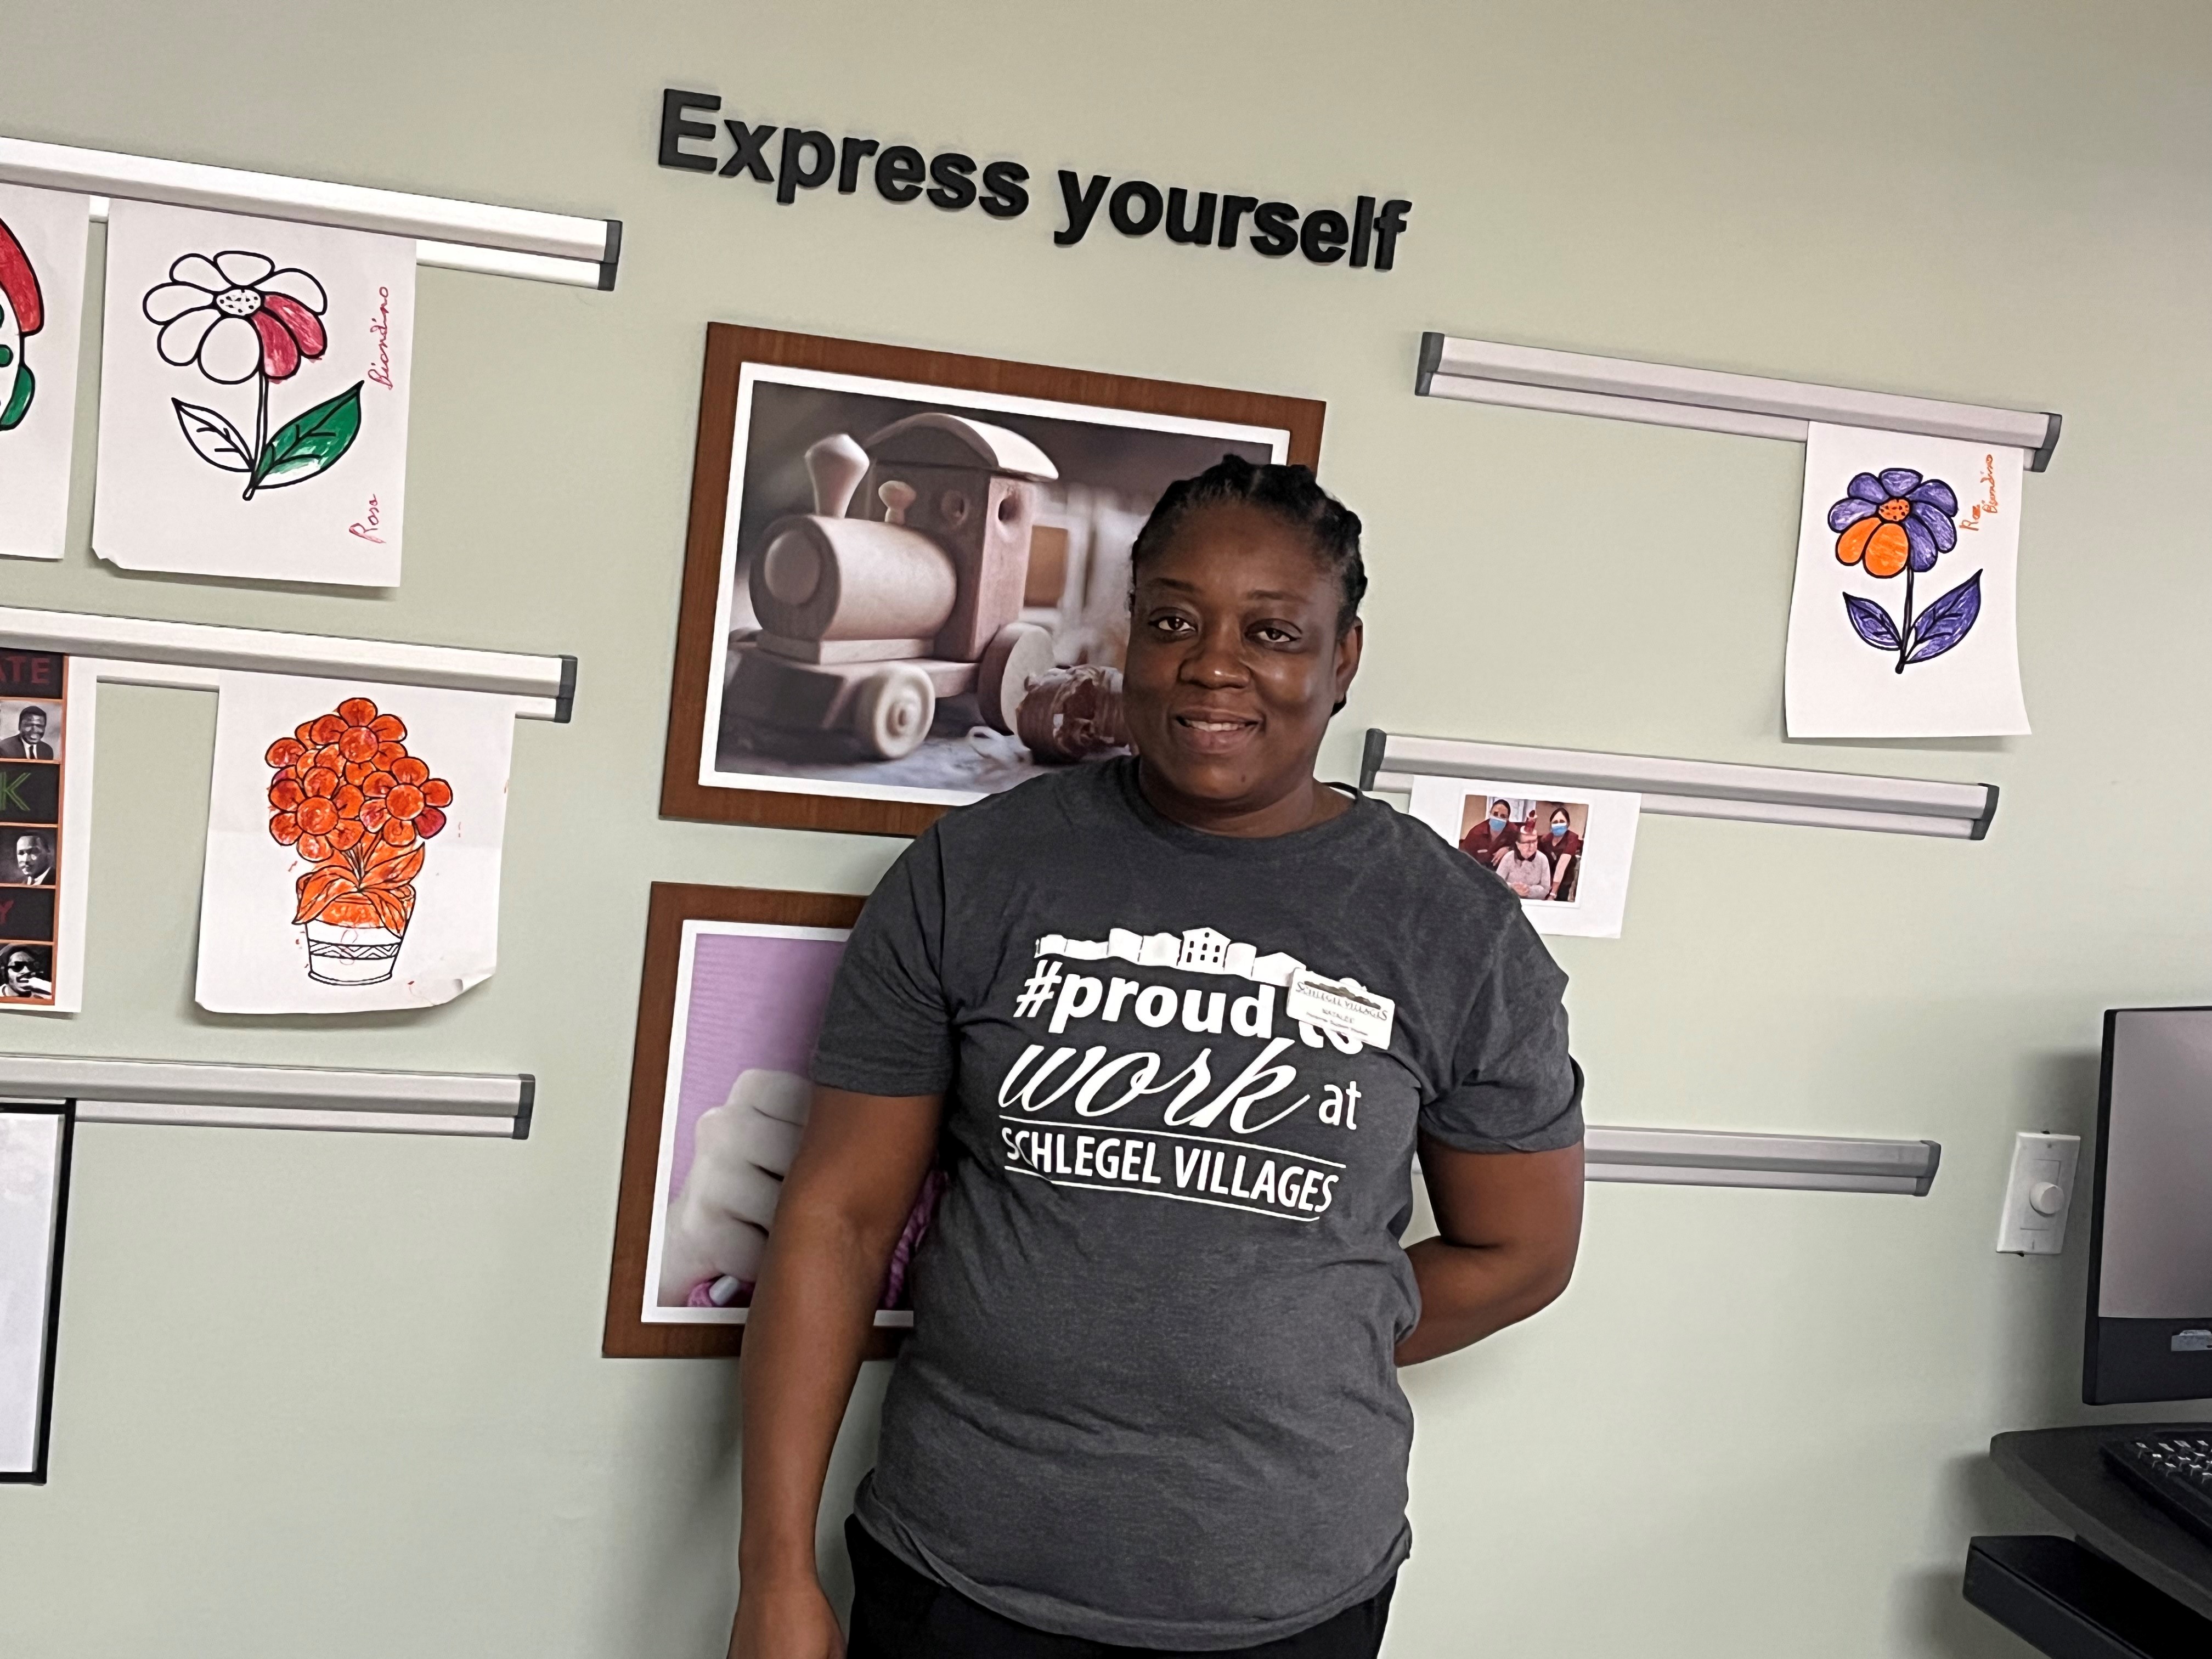 Natalee Chambers poses in her #ProudToWorkAt Schlegel Villages shirt at the Express Yourself art display at Humber Heights